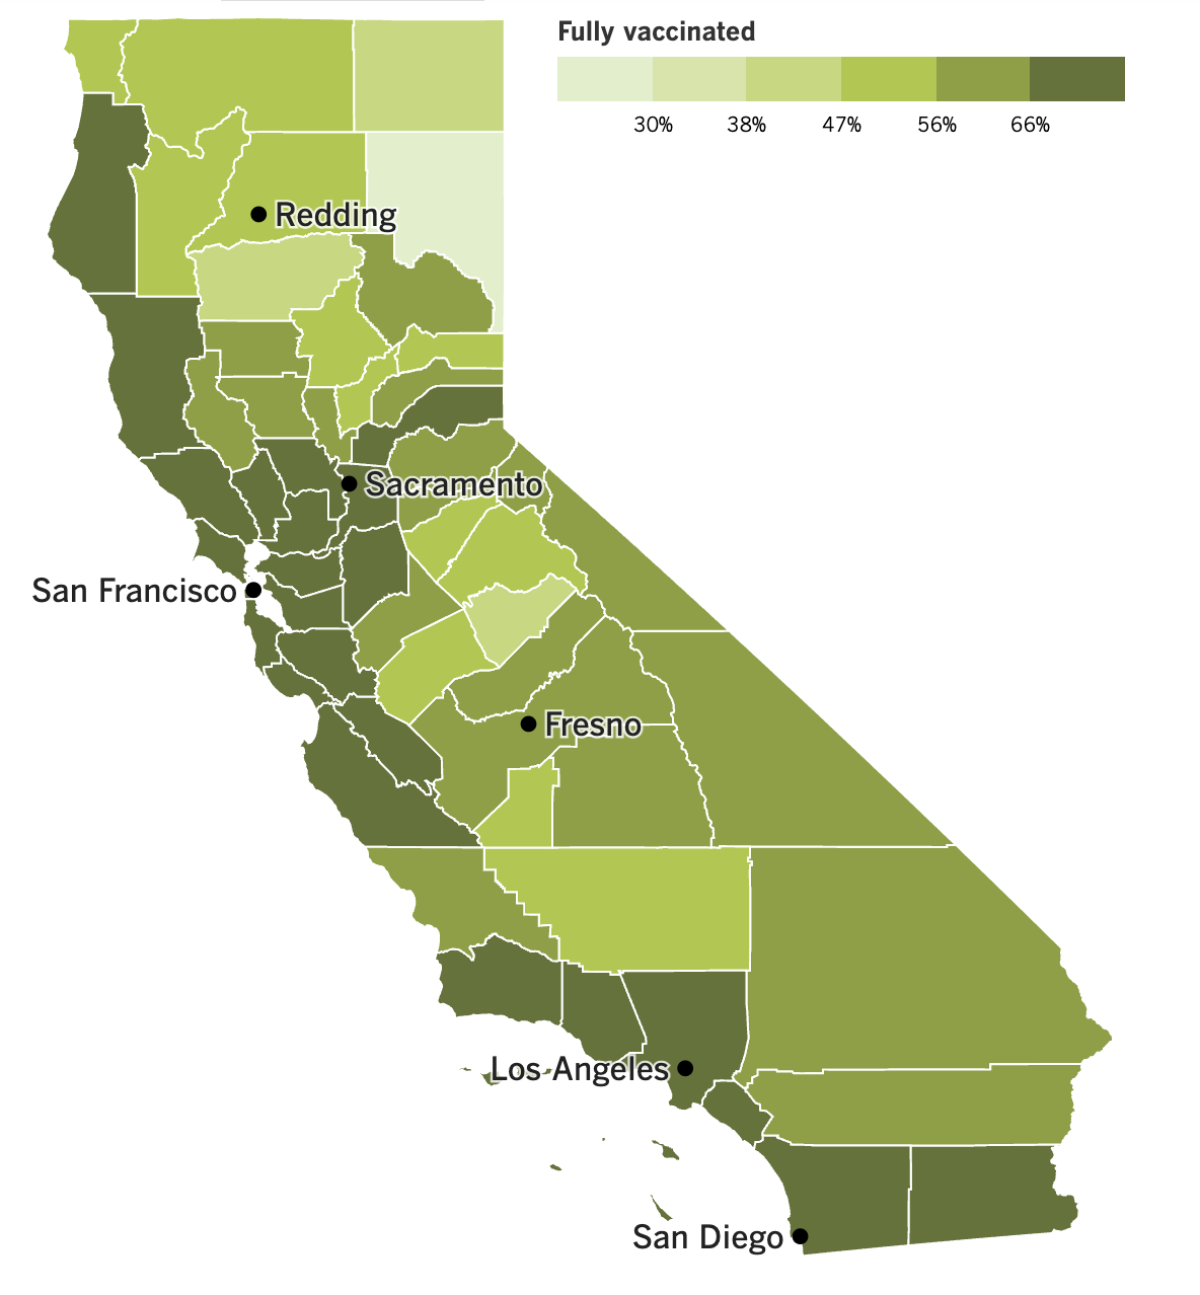 A map showing California's COVID-19 vaccination progress by county as of Nov. 15, 2022.